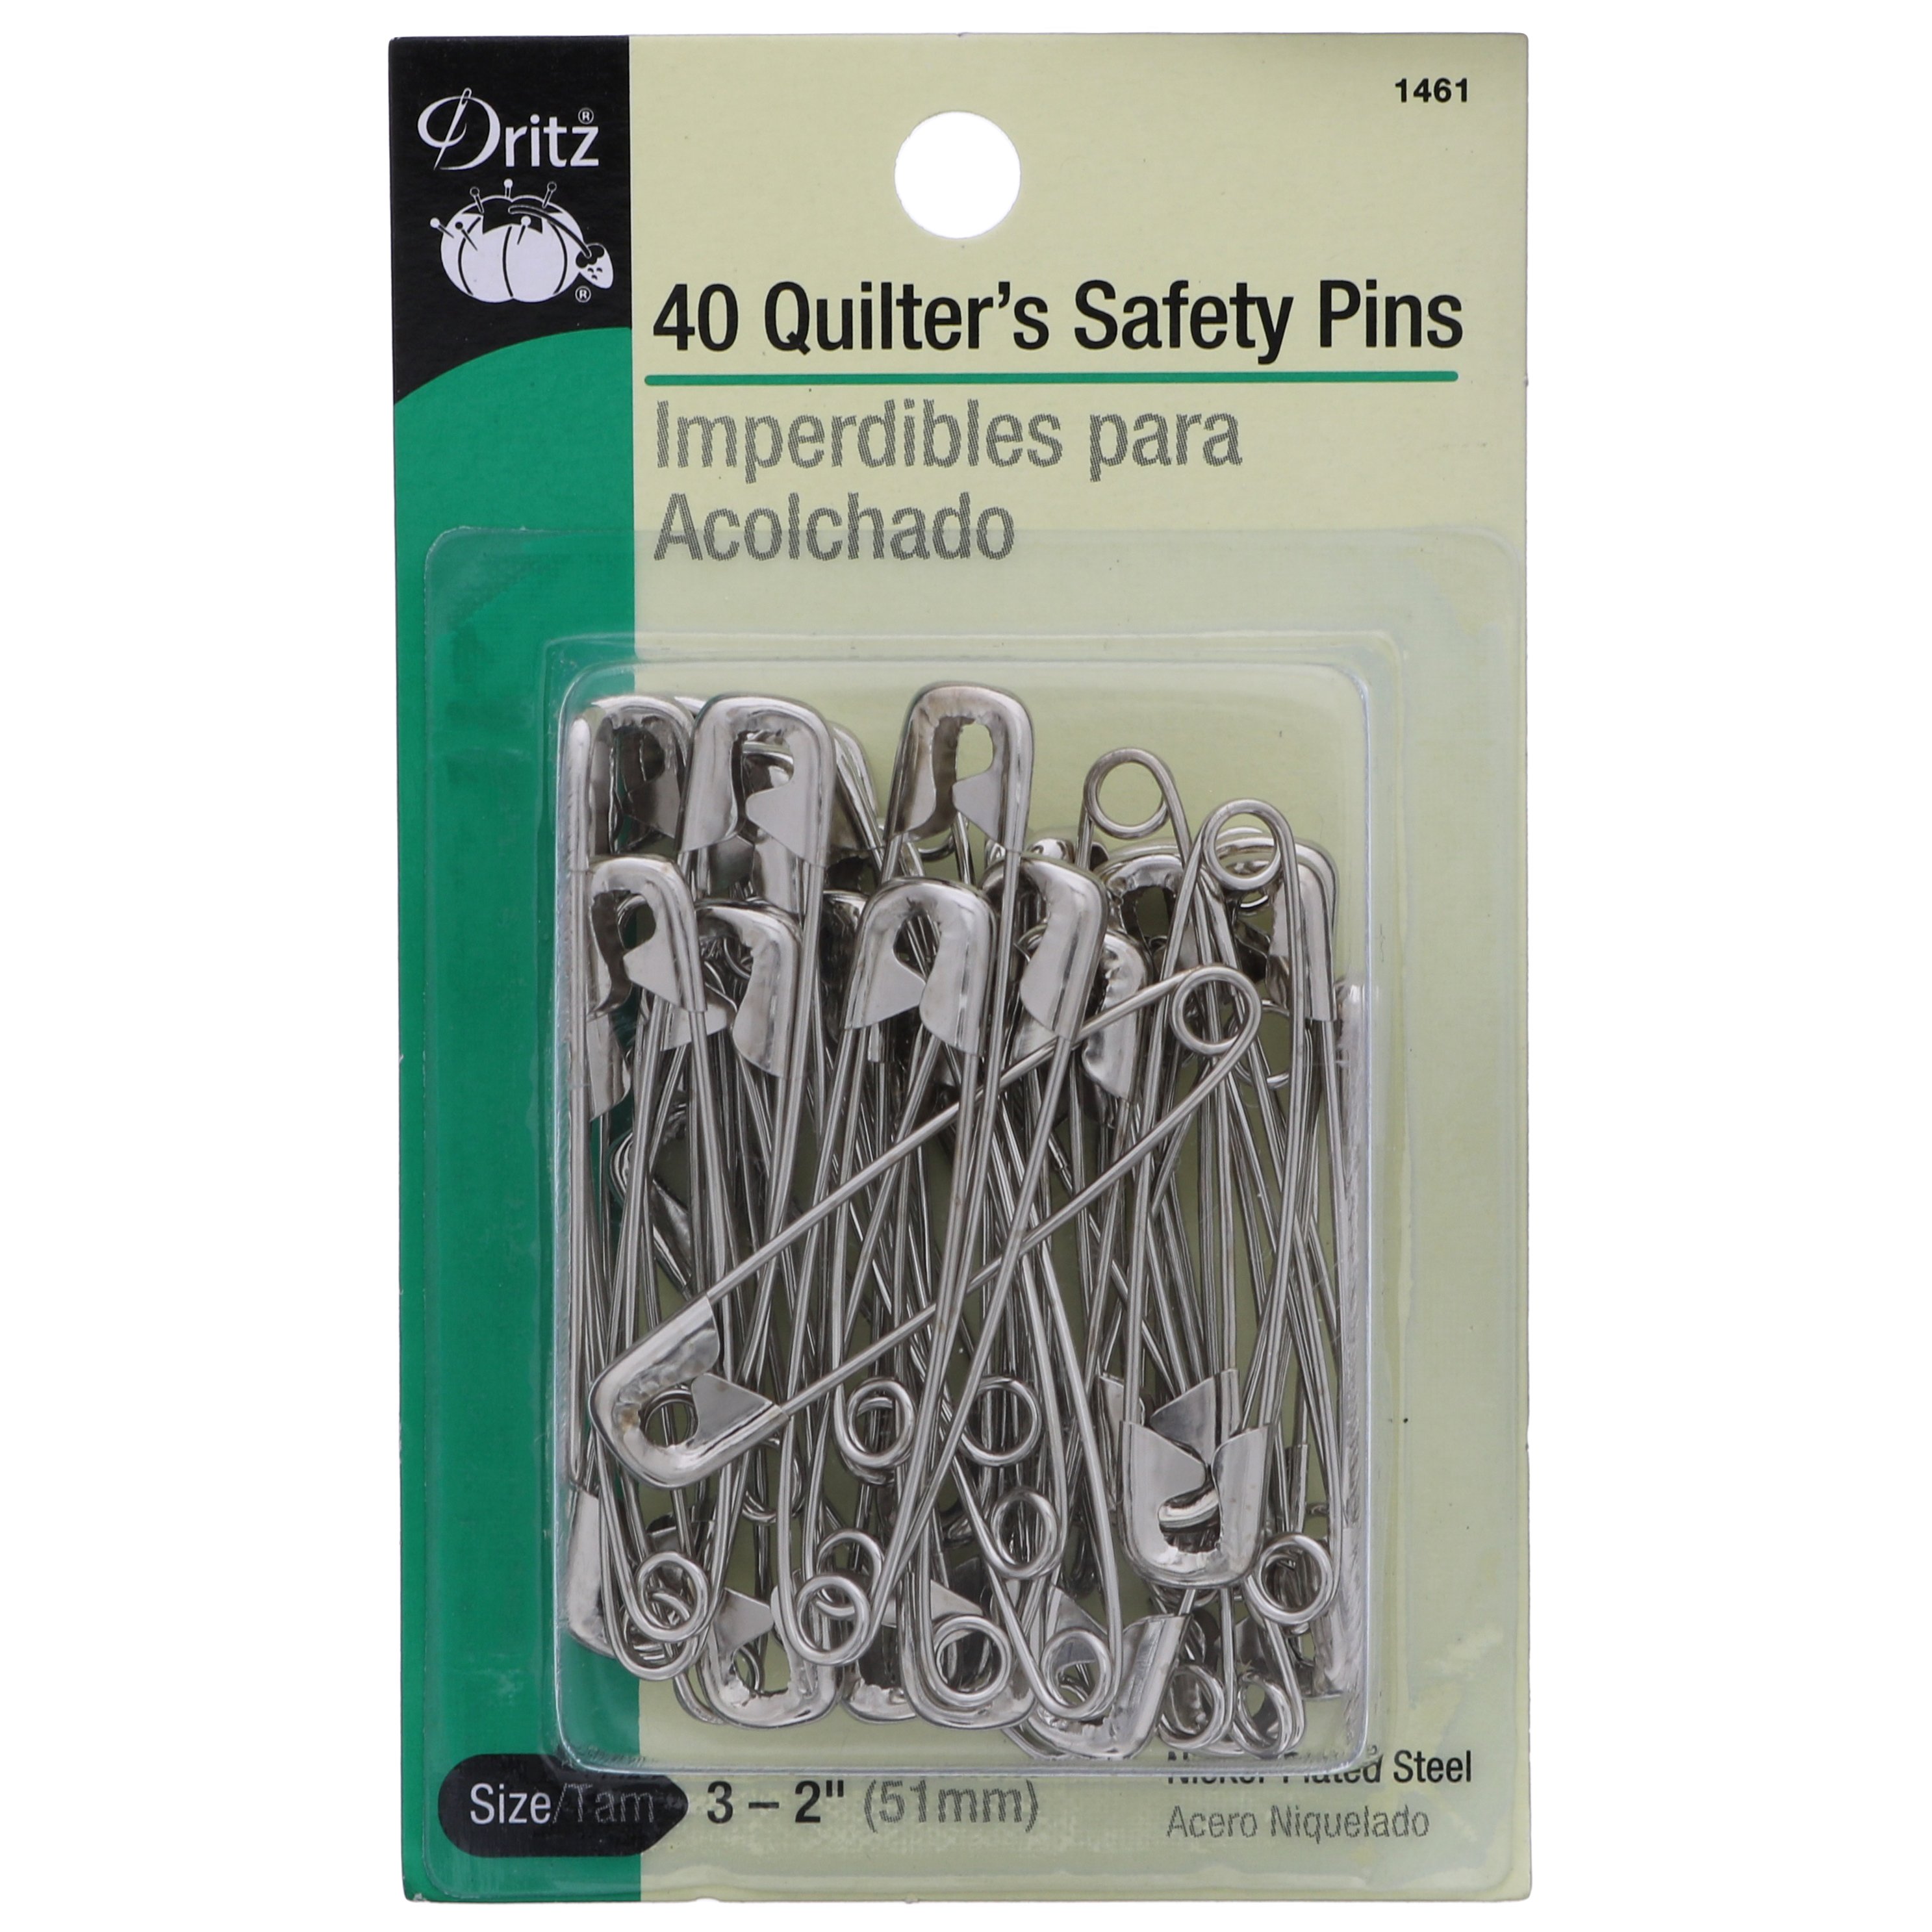 Dritz Quilters Safety Pins - Shop Sewing at H-E-B